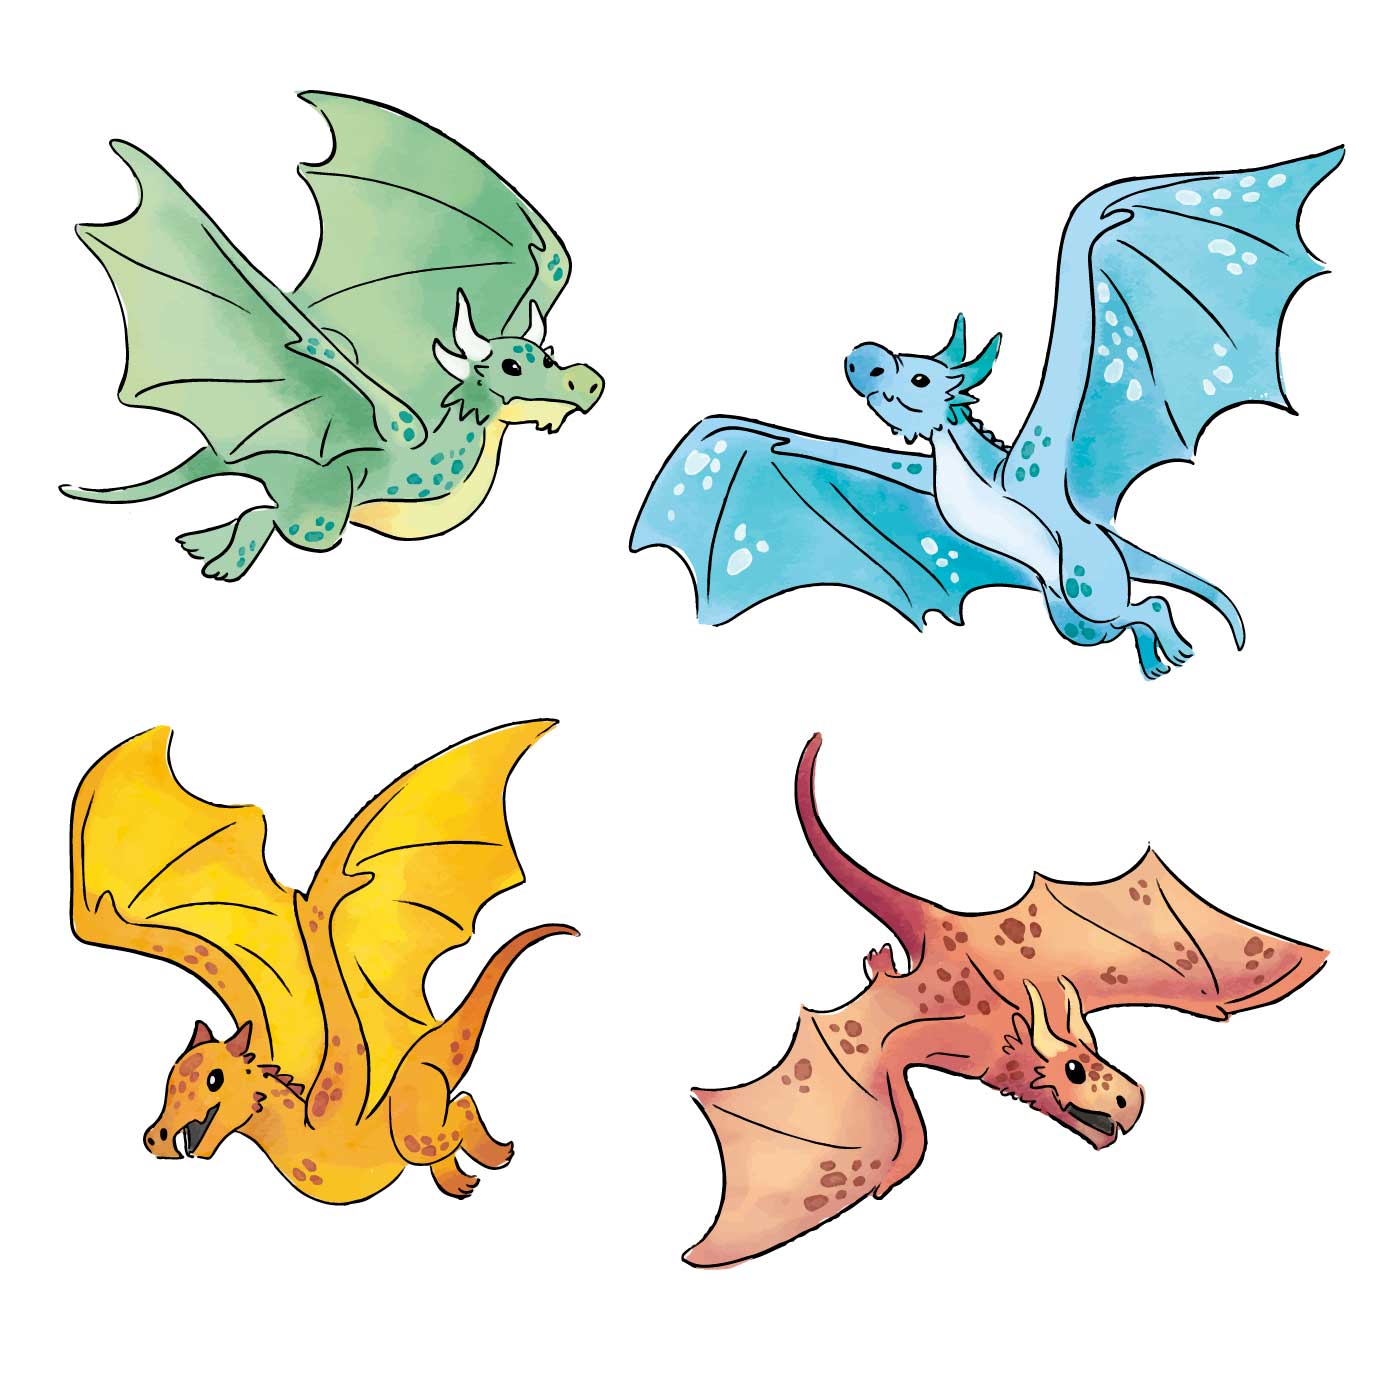 Cute Dragons Collection Download Free Vectors, Clipart